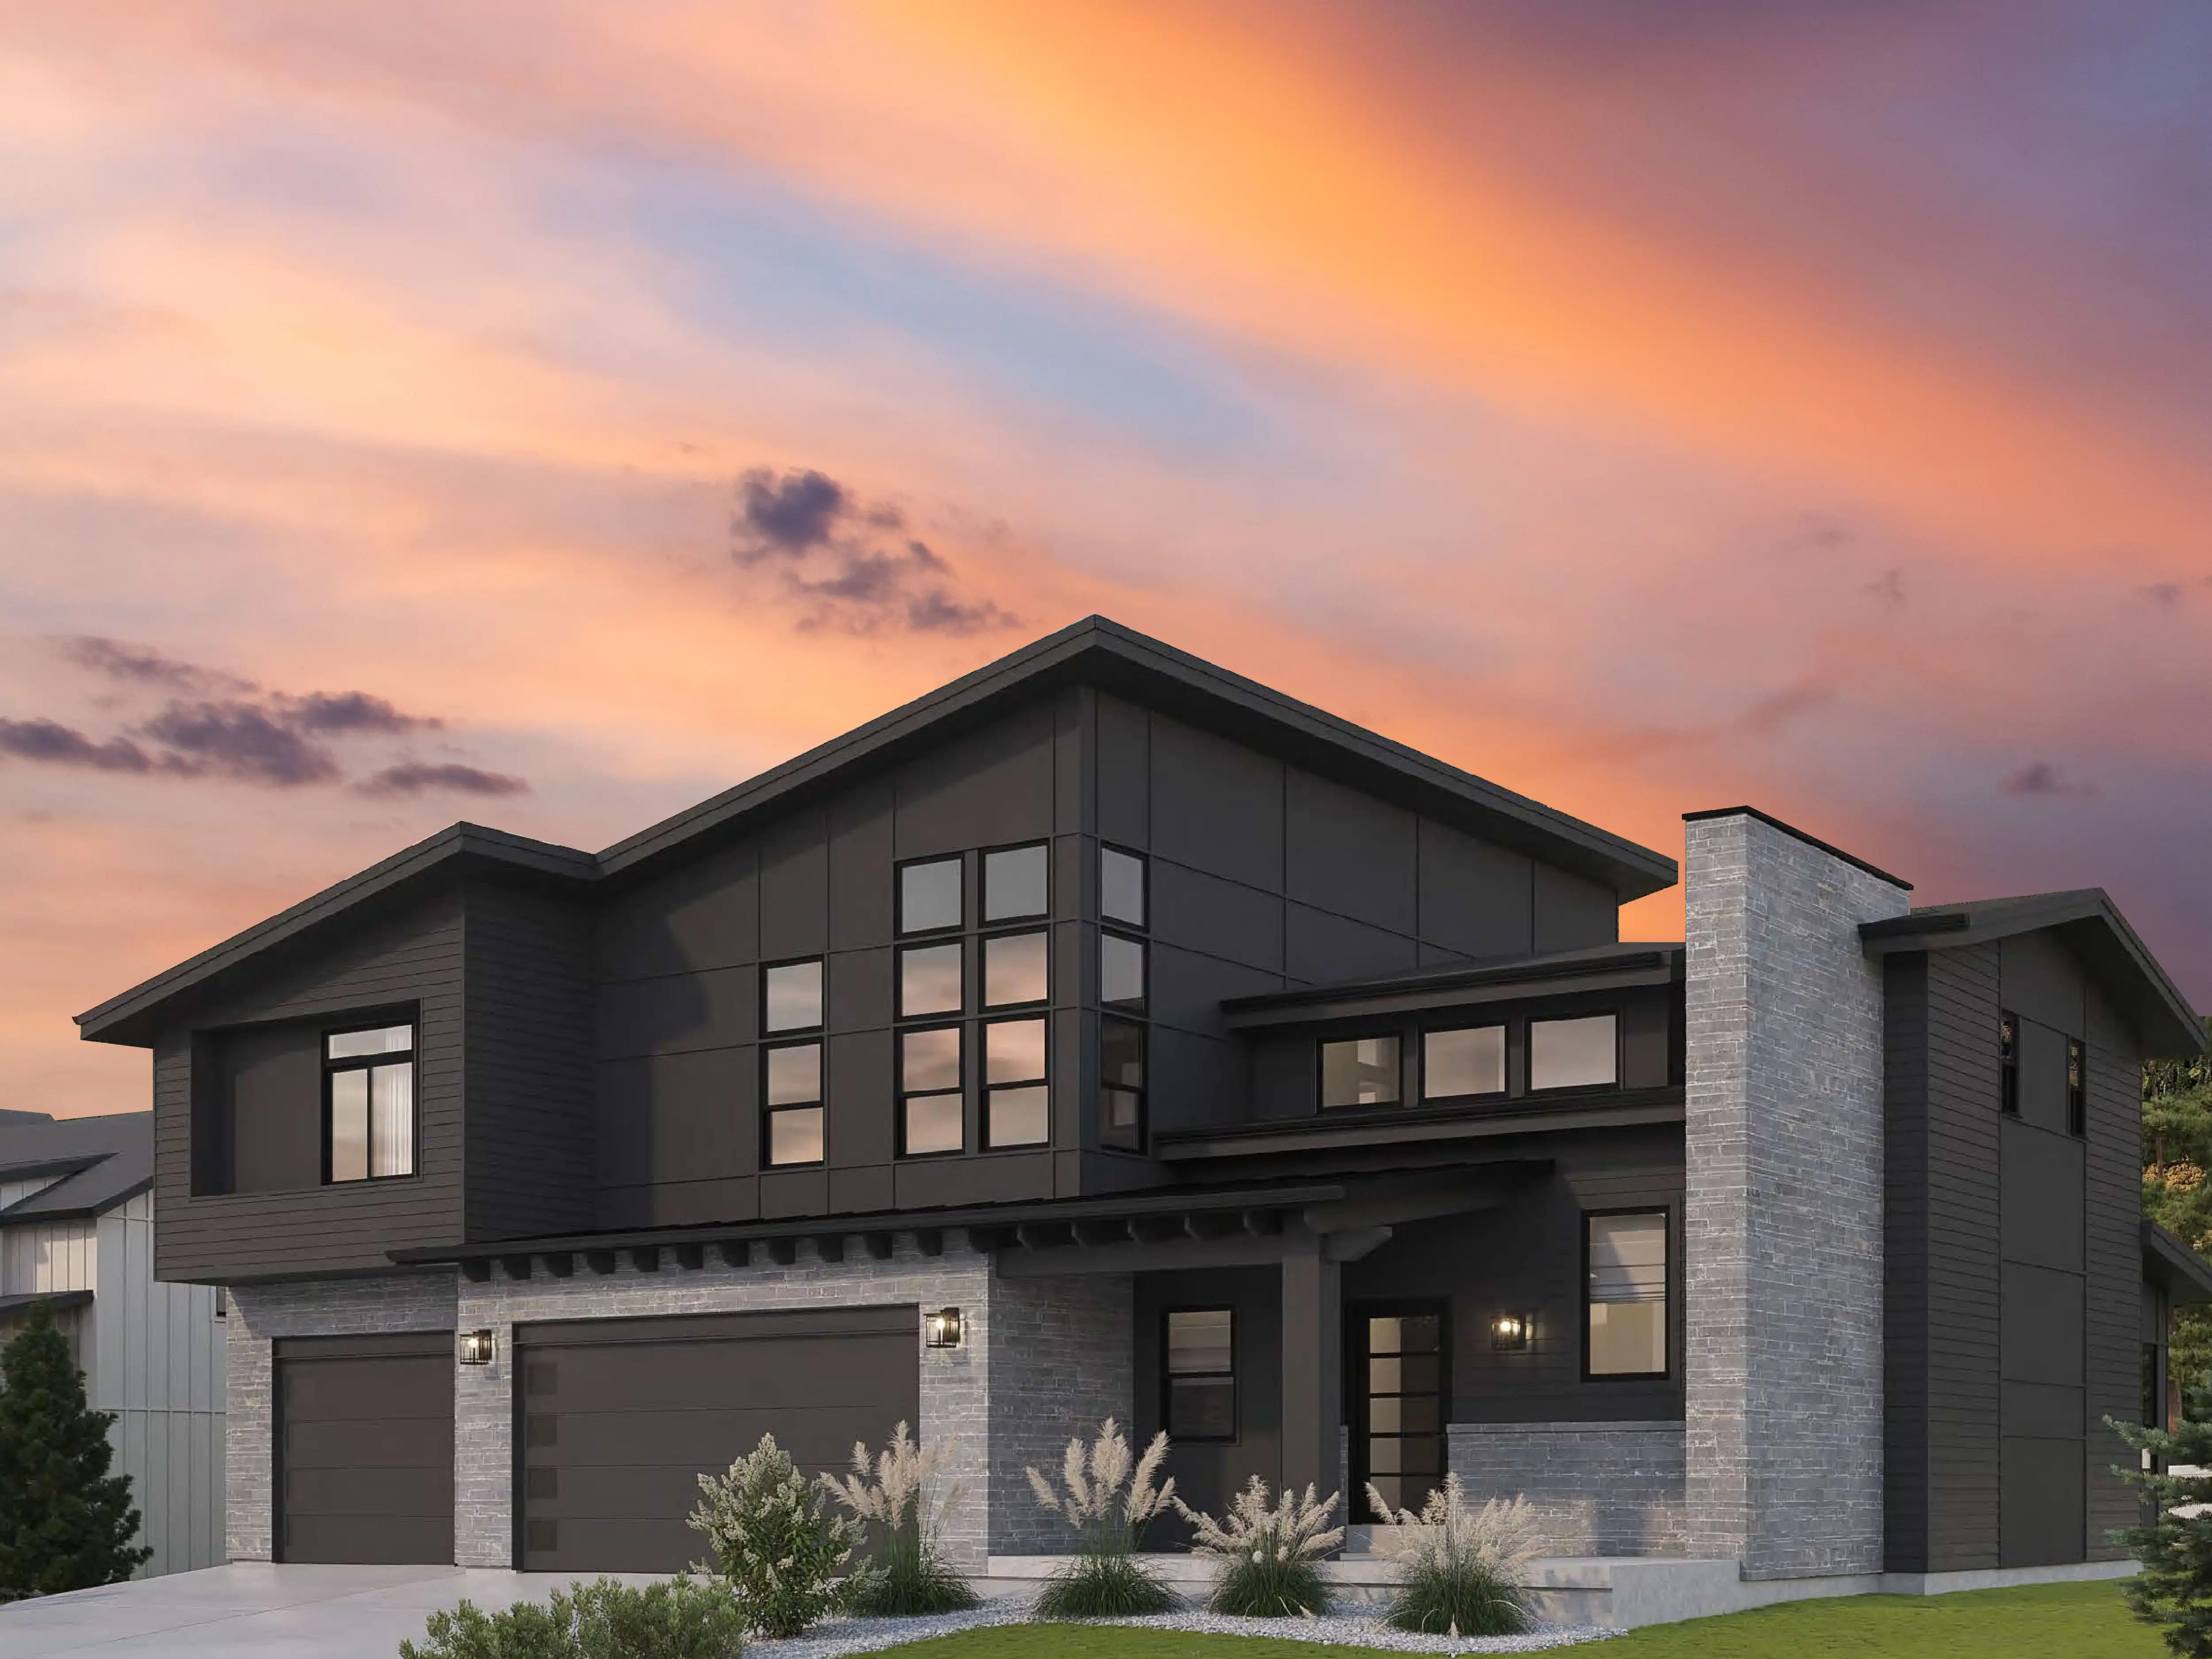 hero image for blog Northern Wasatch Parade of Homes